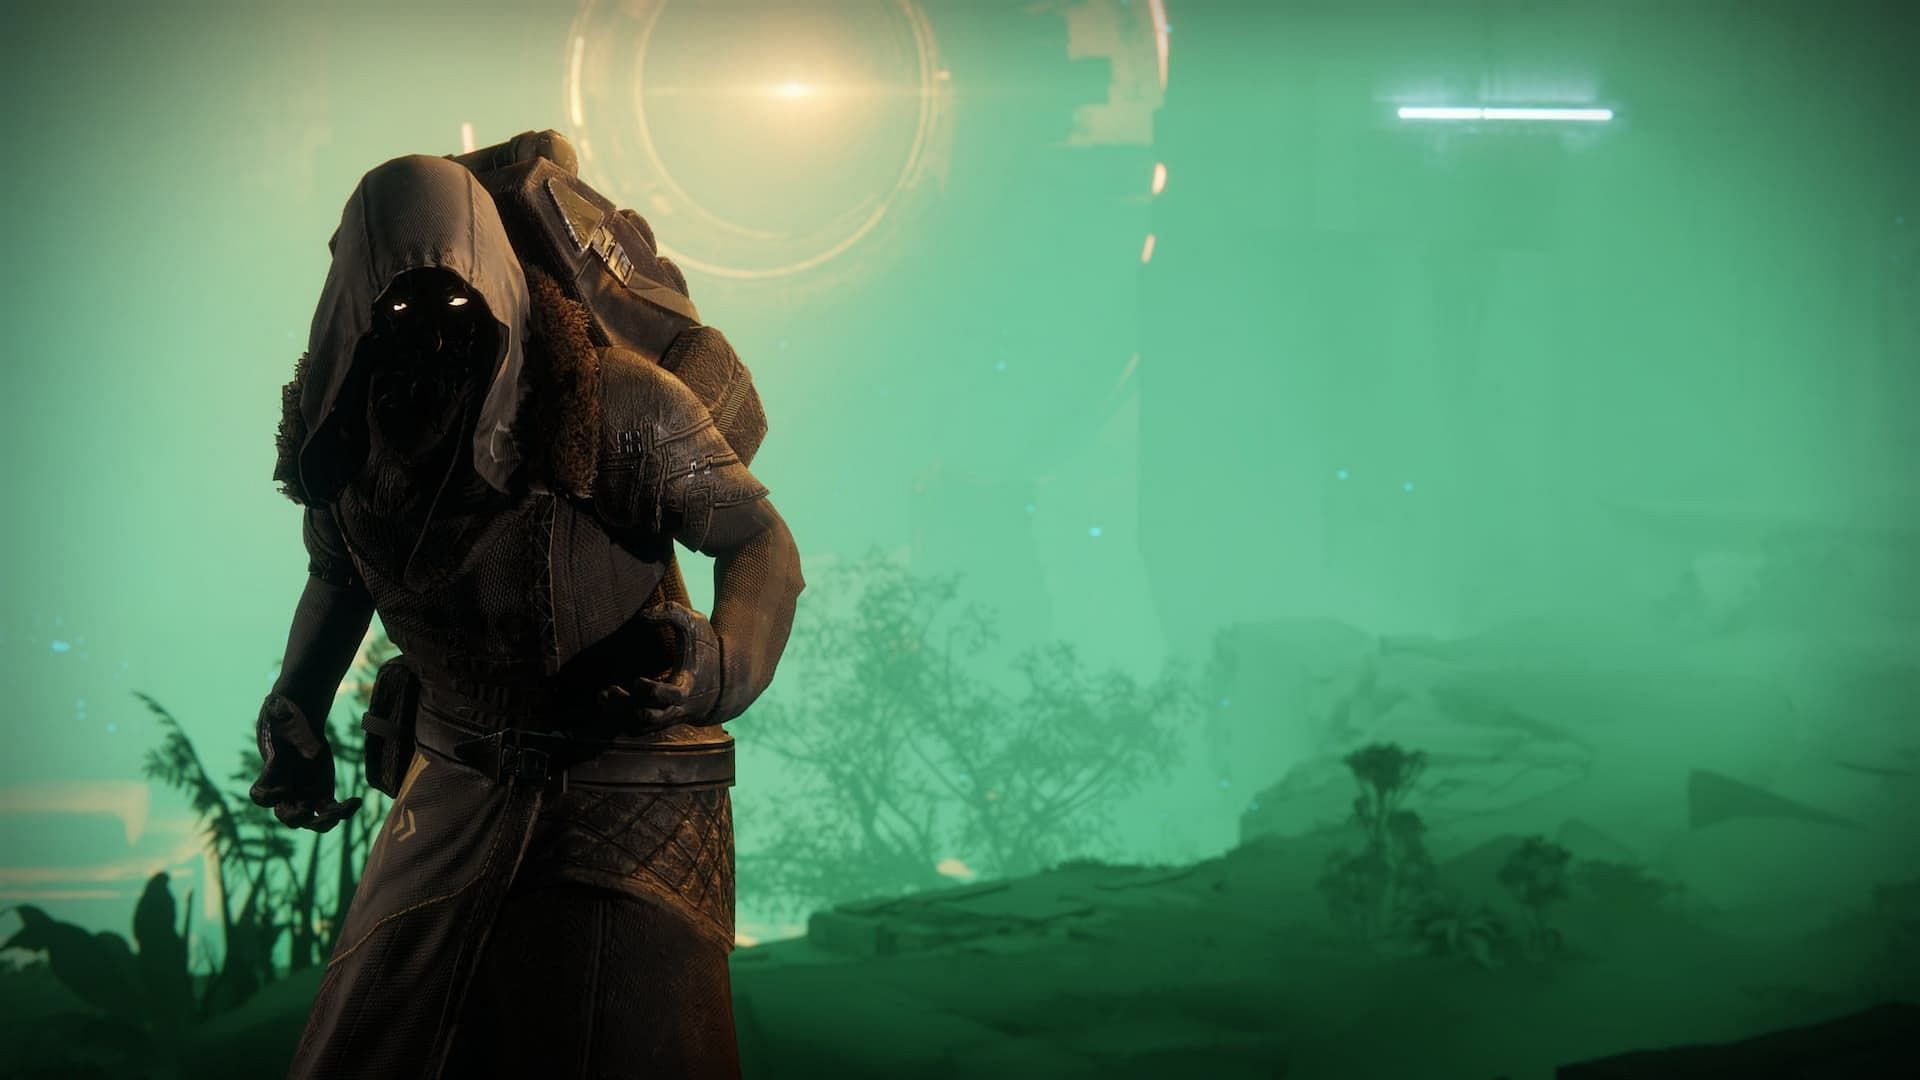 Xur, the Agent of the Nine, comes to pay lightbearers a visit every weekend in Destiny 2 (Image via Bungie)